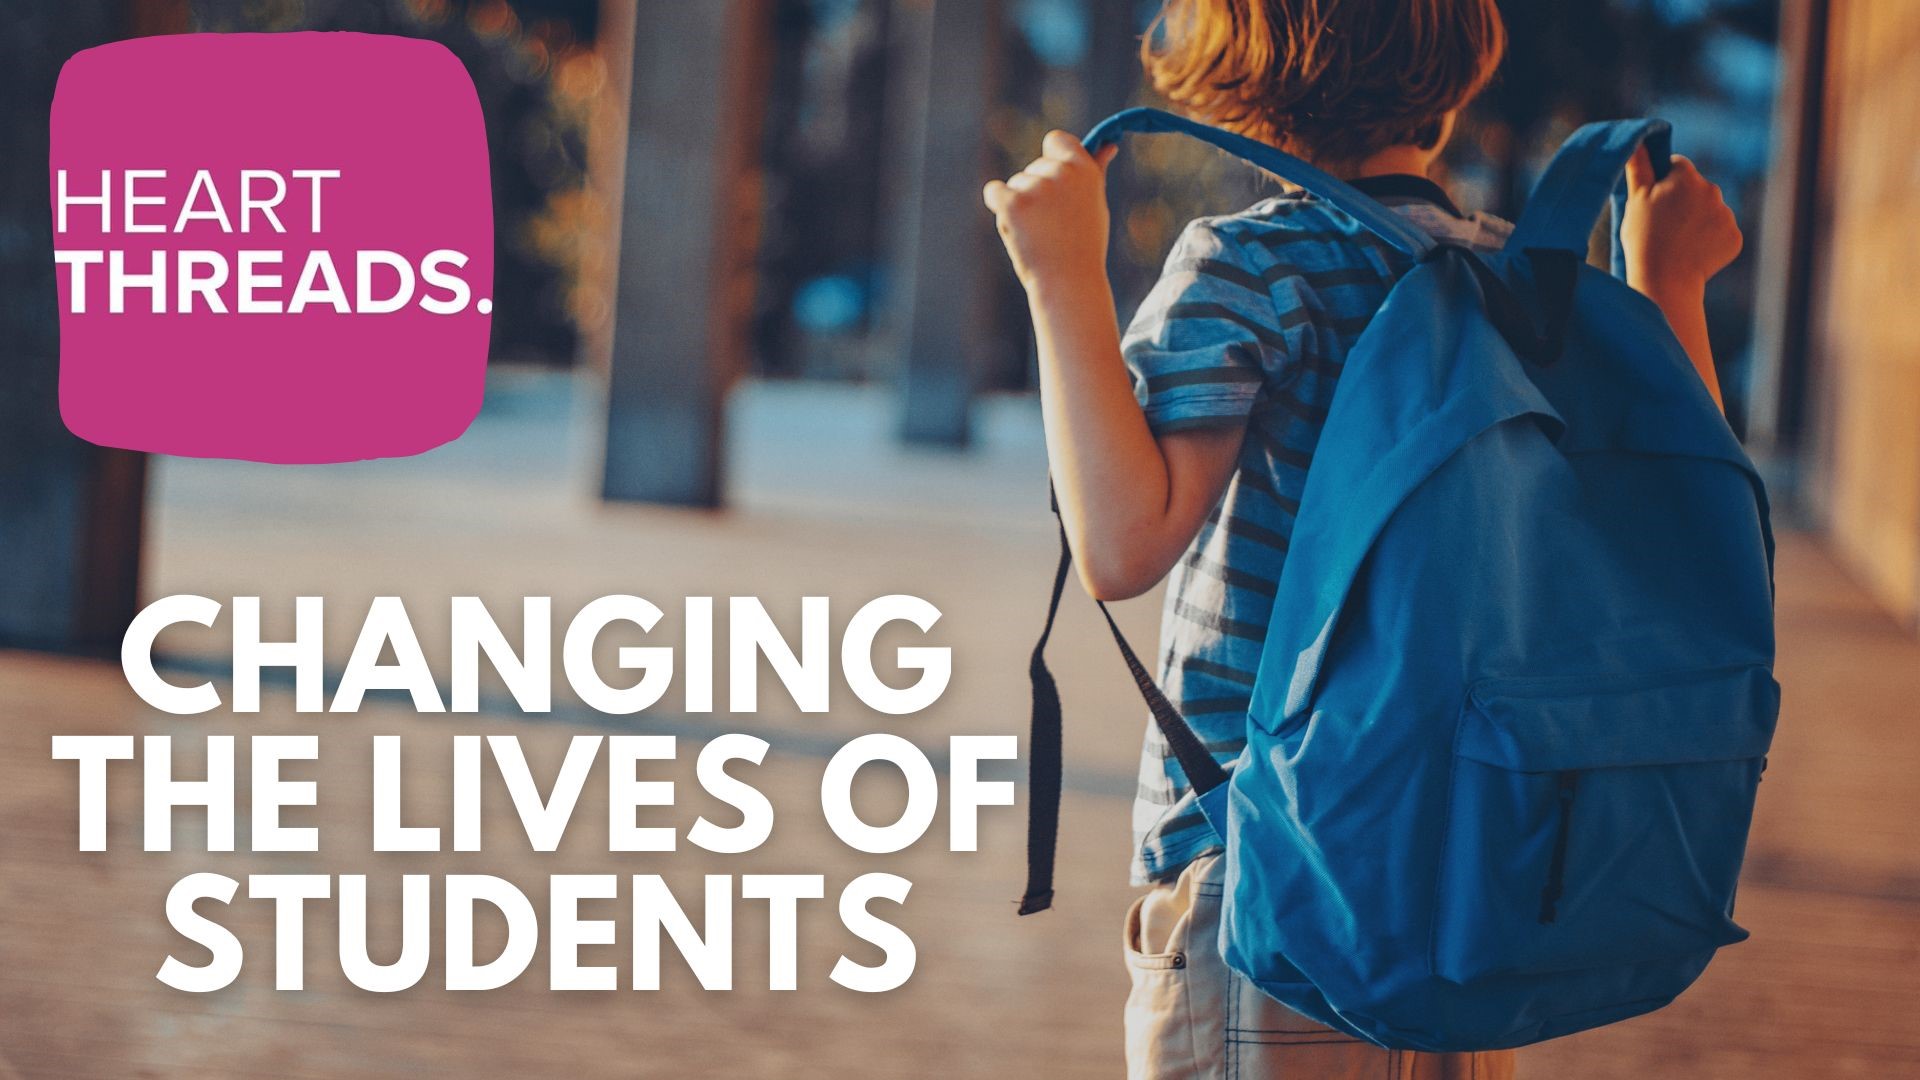 A collection of stories highlighting those who are changing the lives of students. From crossing guards to educators and bus drivers, a look at the everyday heroes.